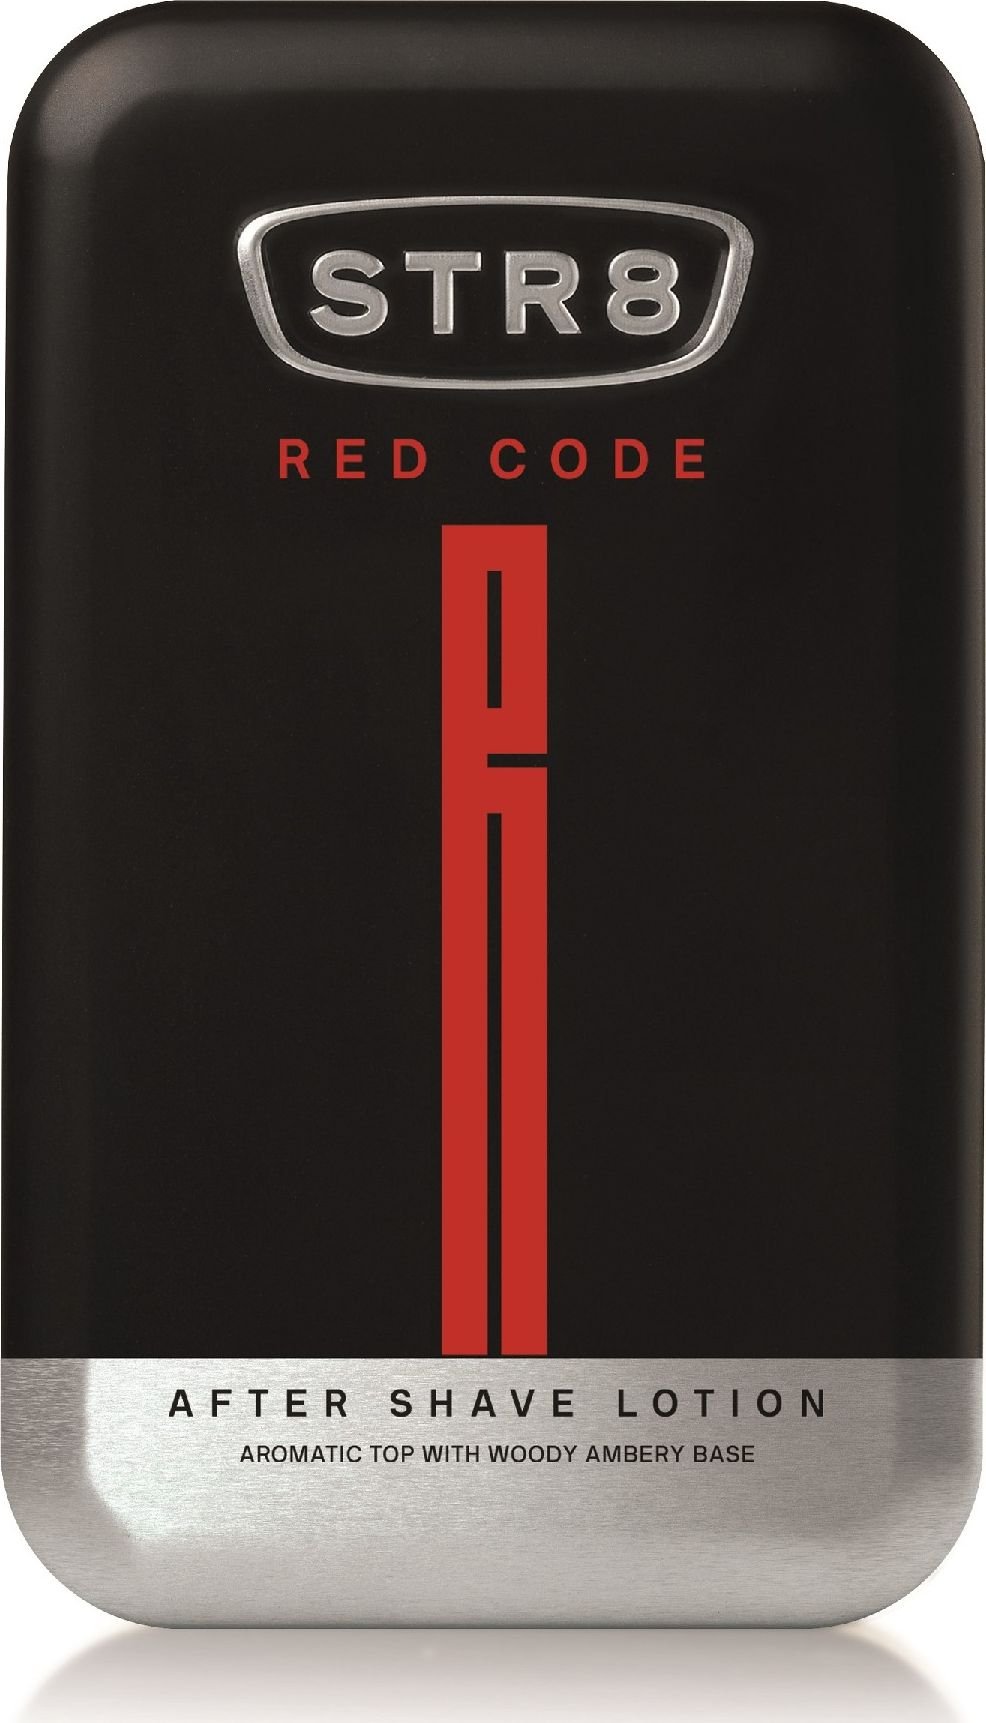 Lotiune After shave STR8, Red Code, 100 ml